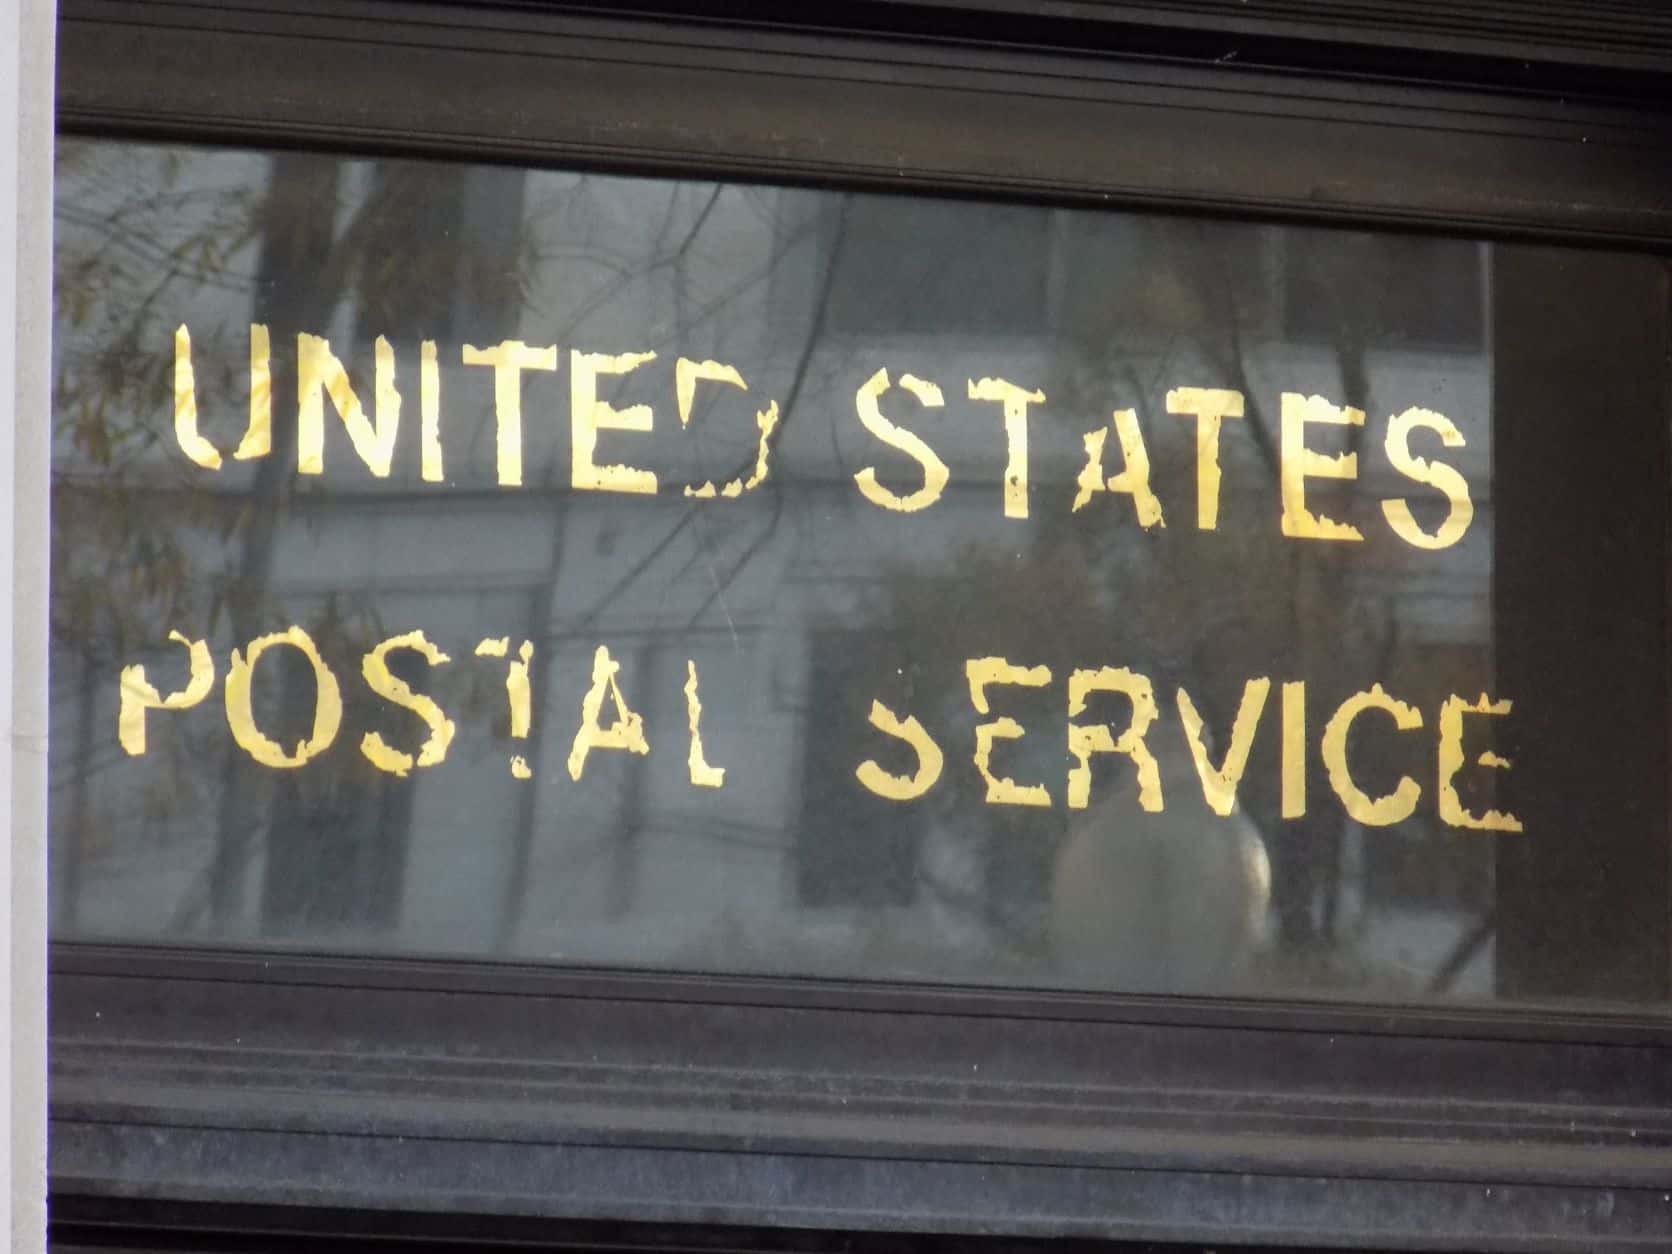 <strong>House Expected to Approve Overhaul of Postal Service</strong>